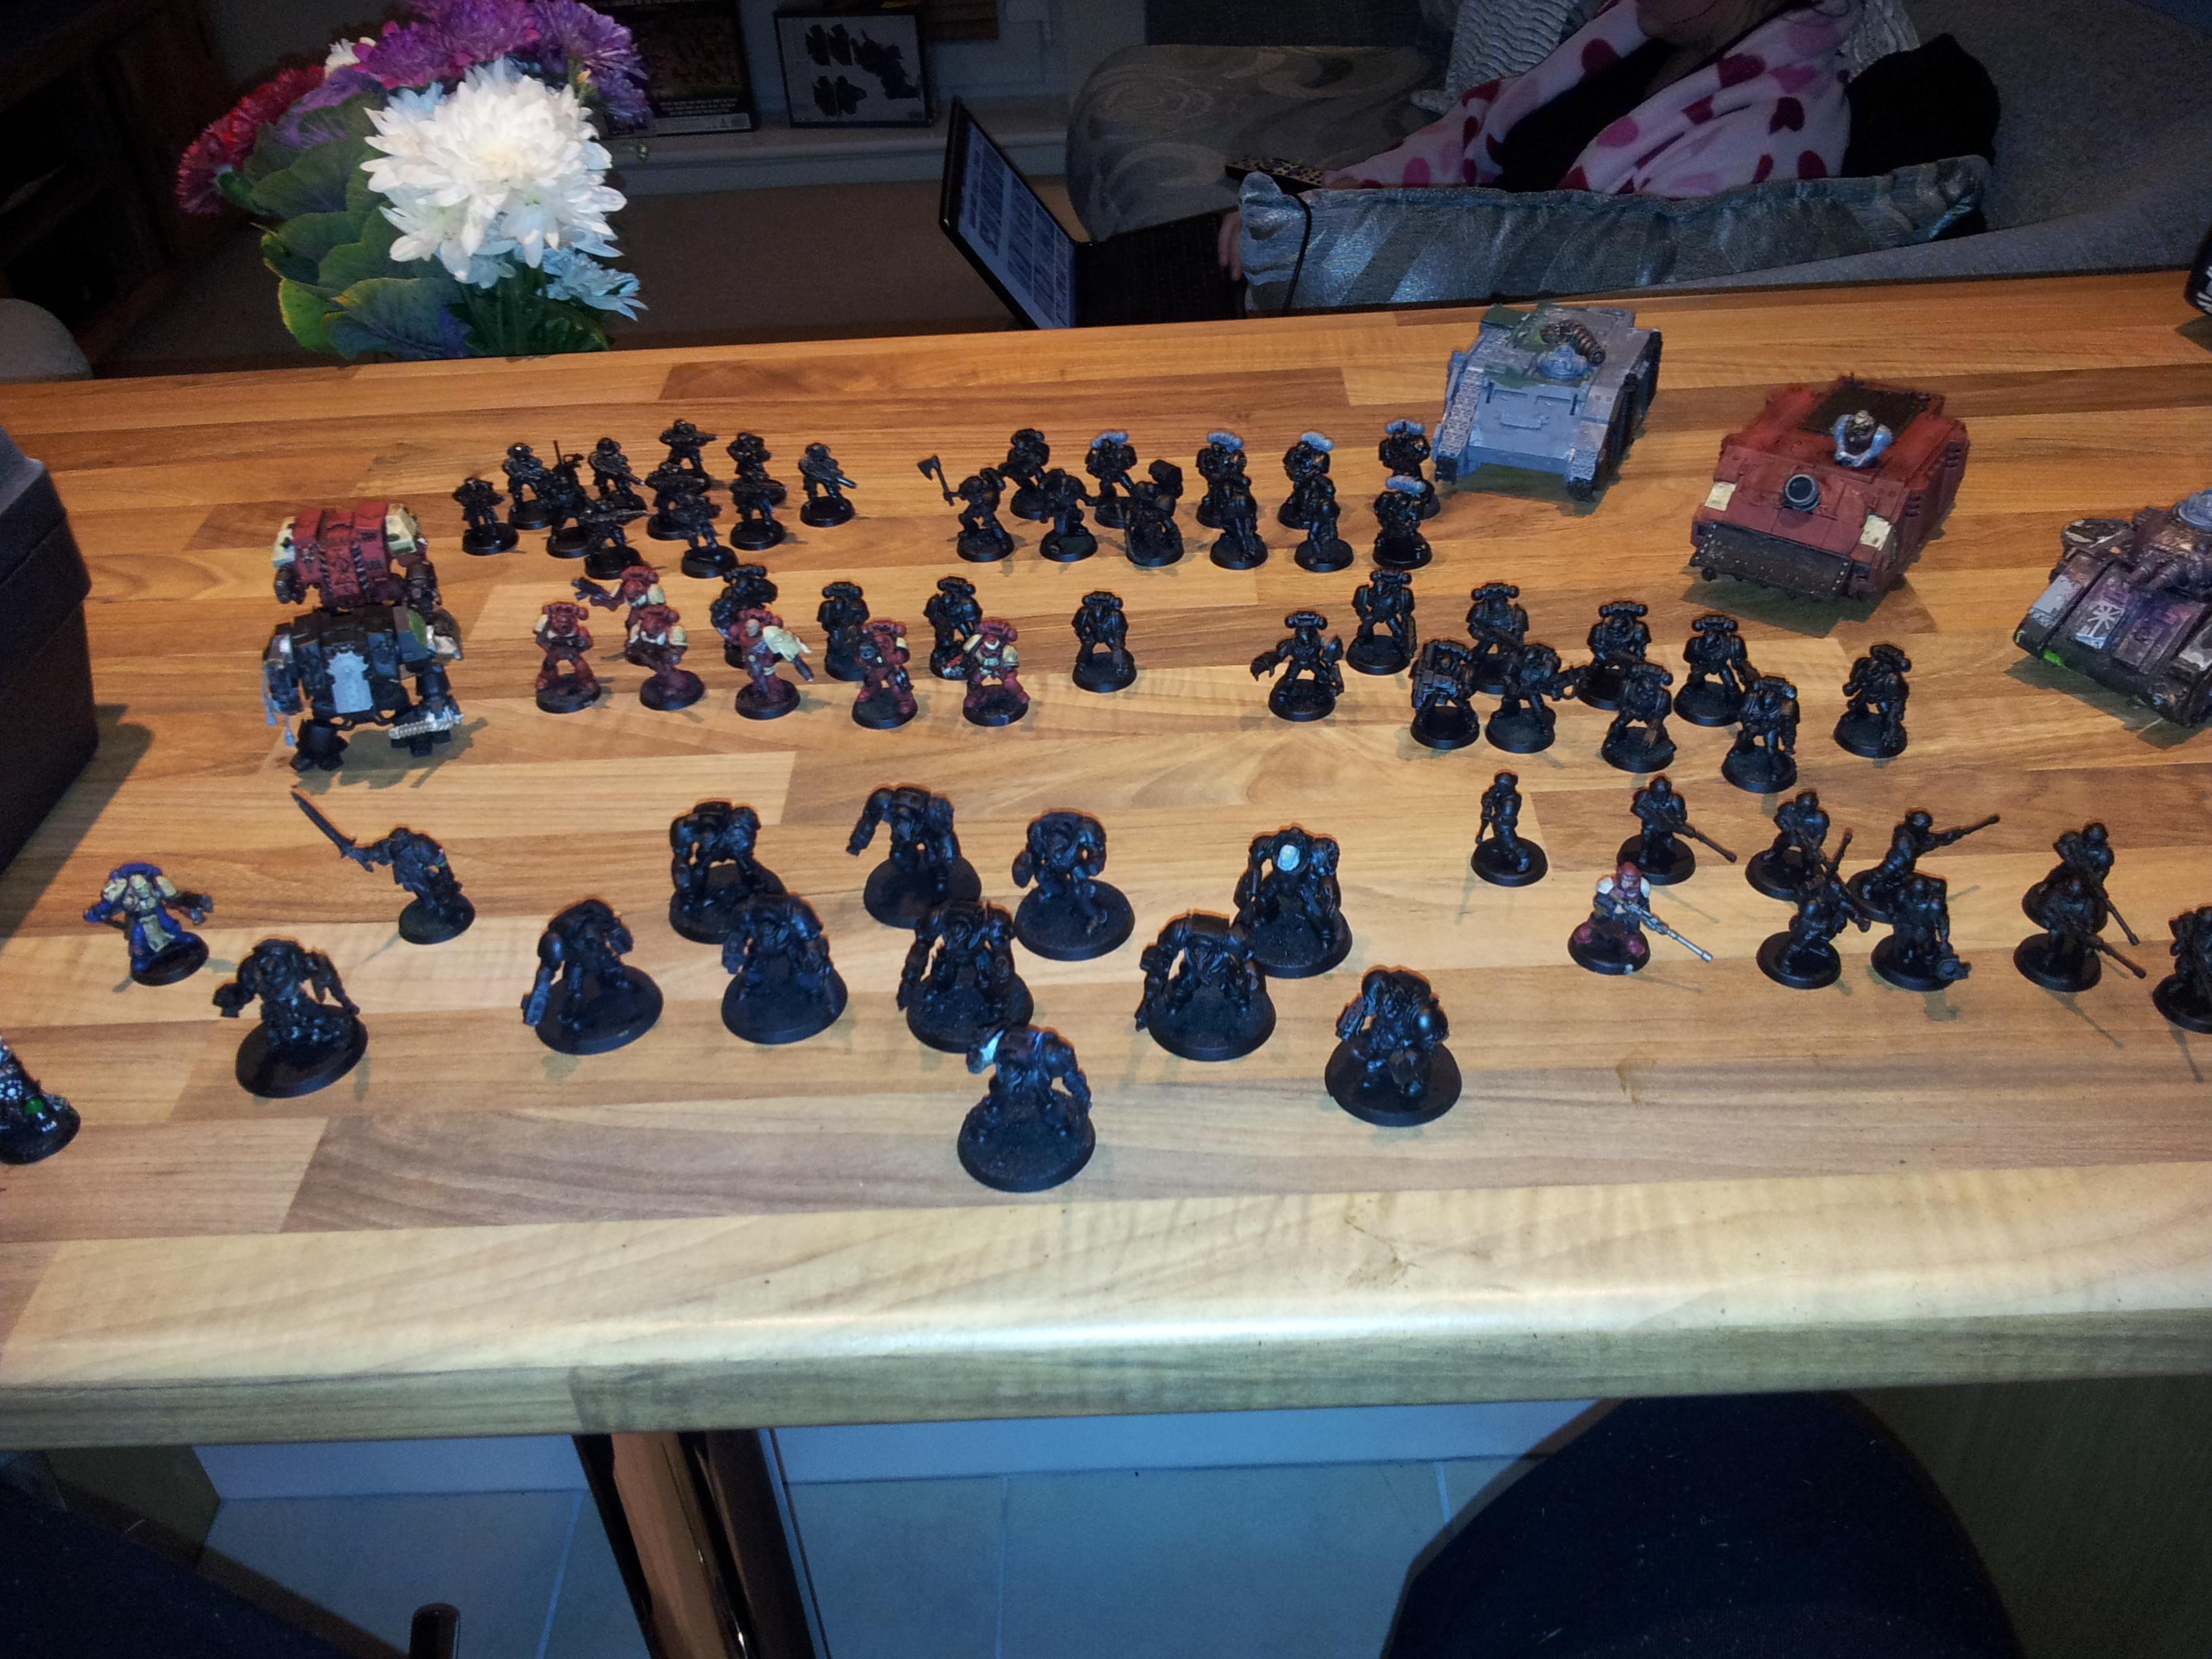 The full army. (with painted models)